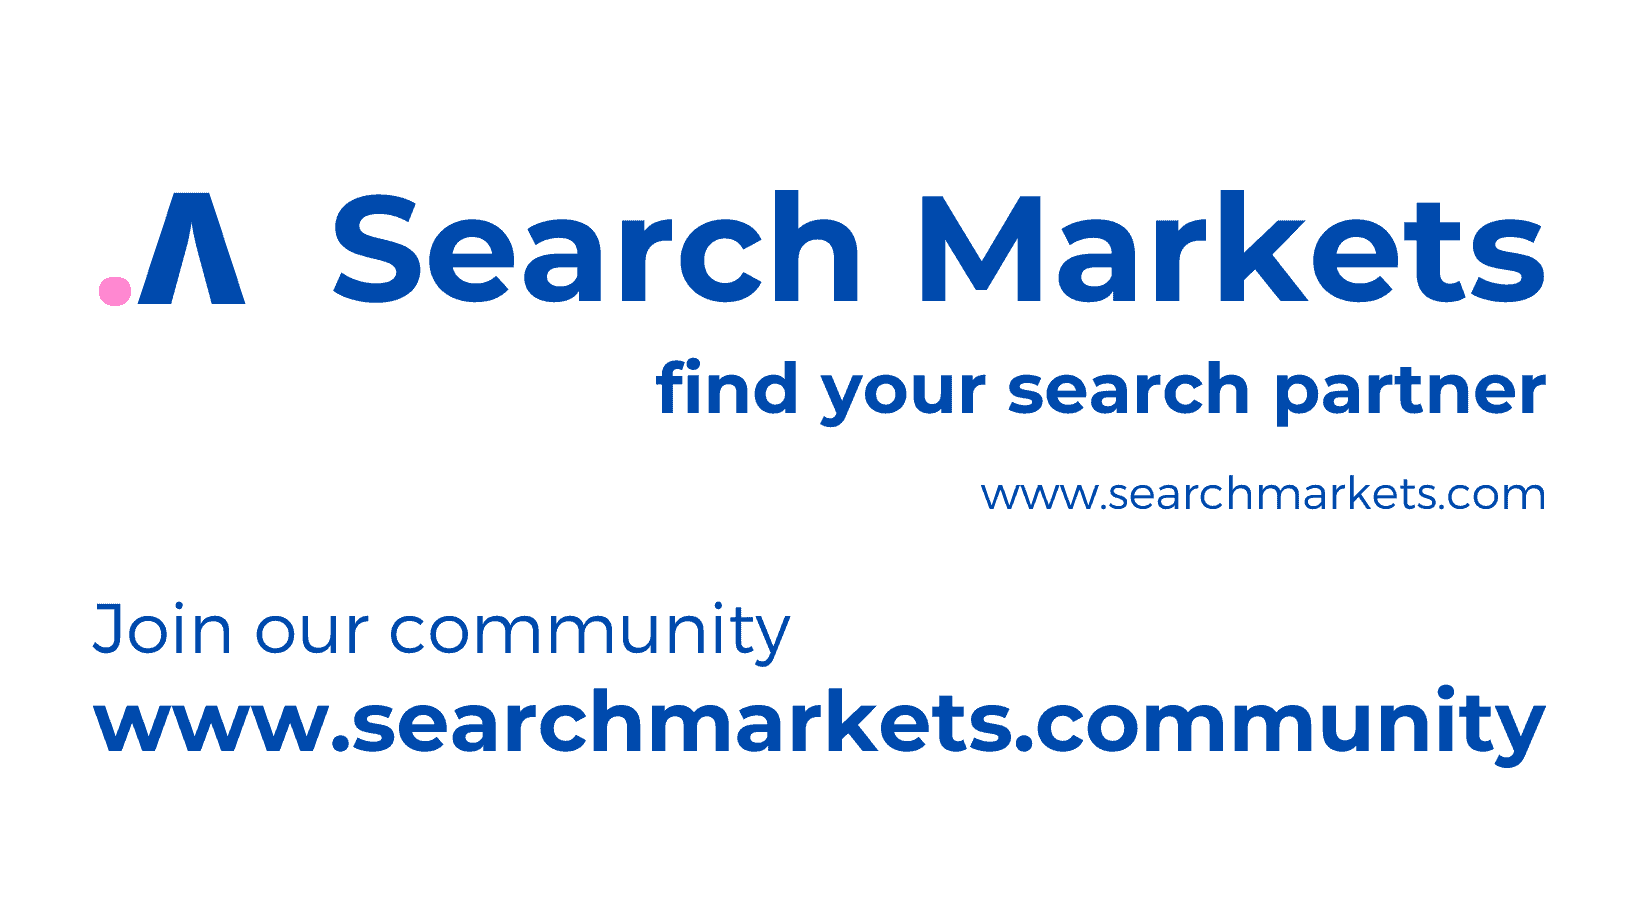 Search-Markets-Facebook-banner-Group-3.png